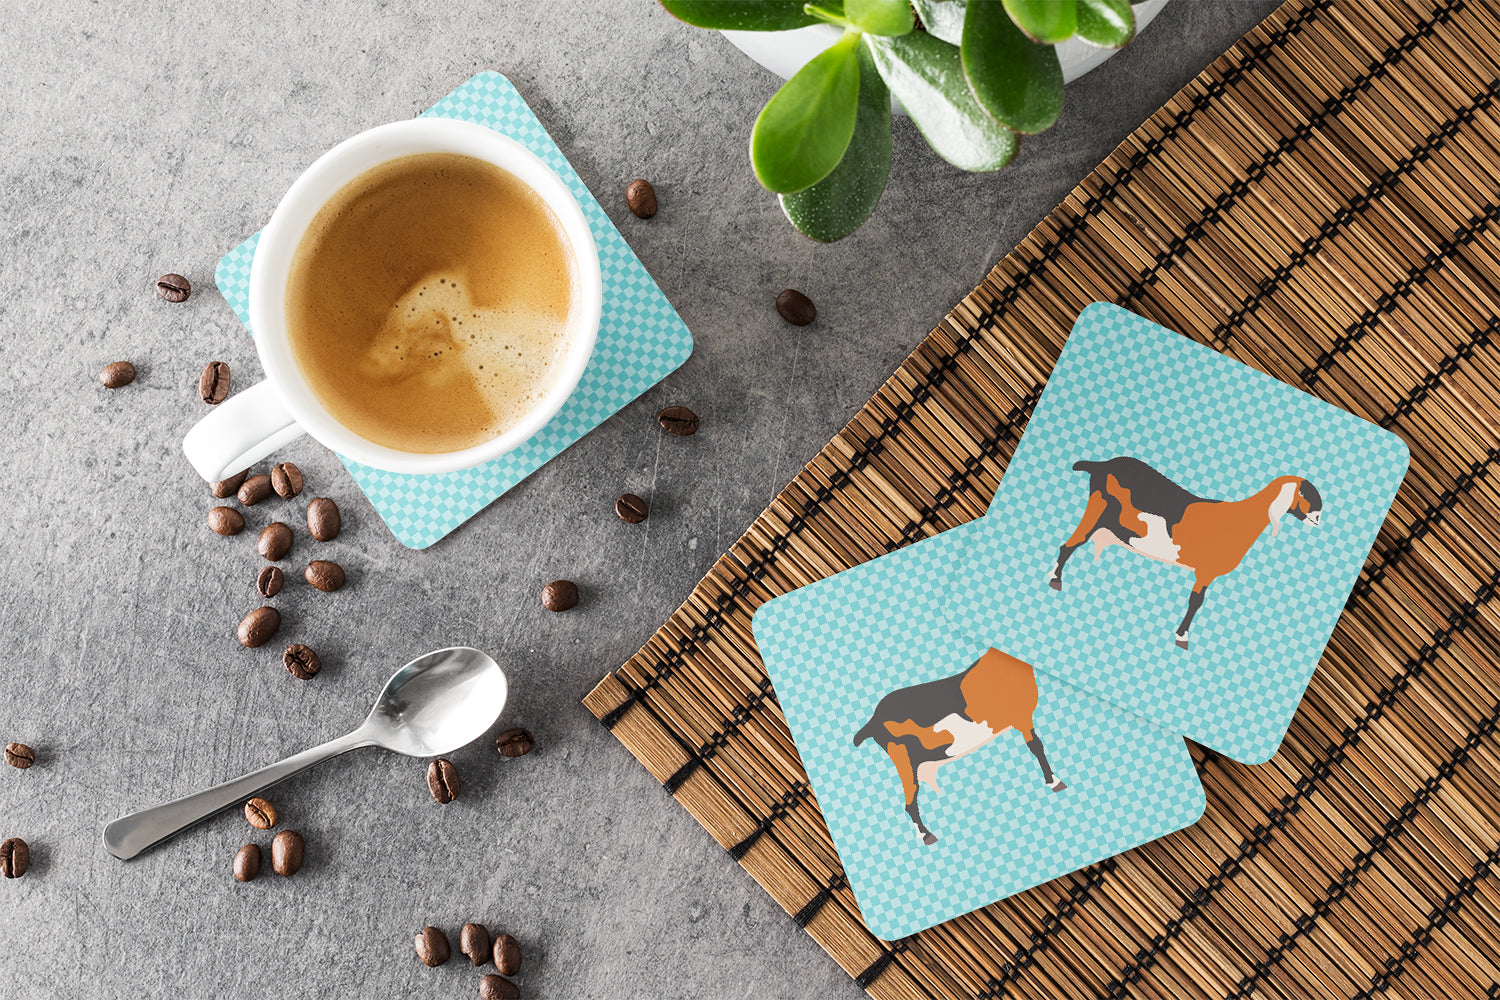 Anglo-nubian Nubian Goat Blue Check Foam Coaster Set of 4 BB8057FC - the-store.com